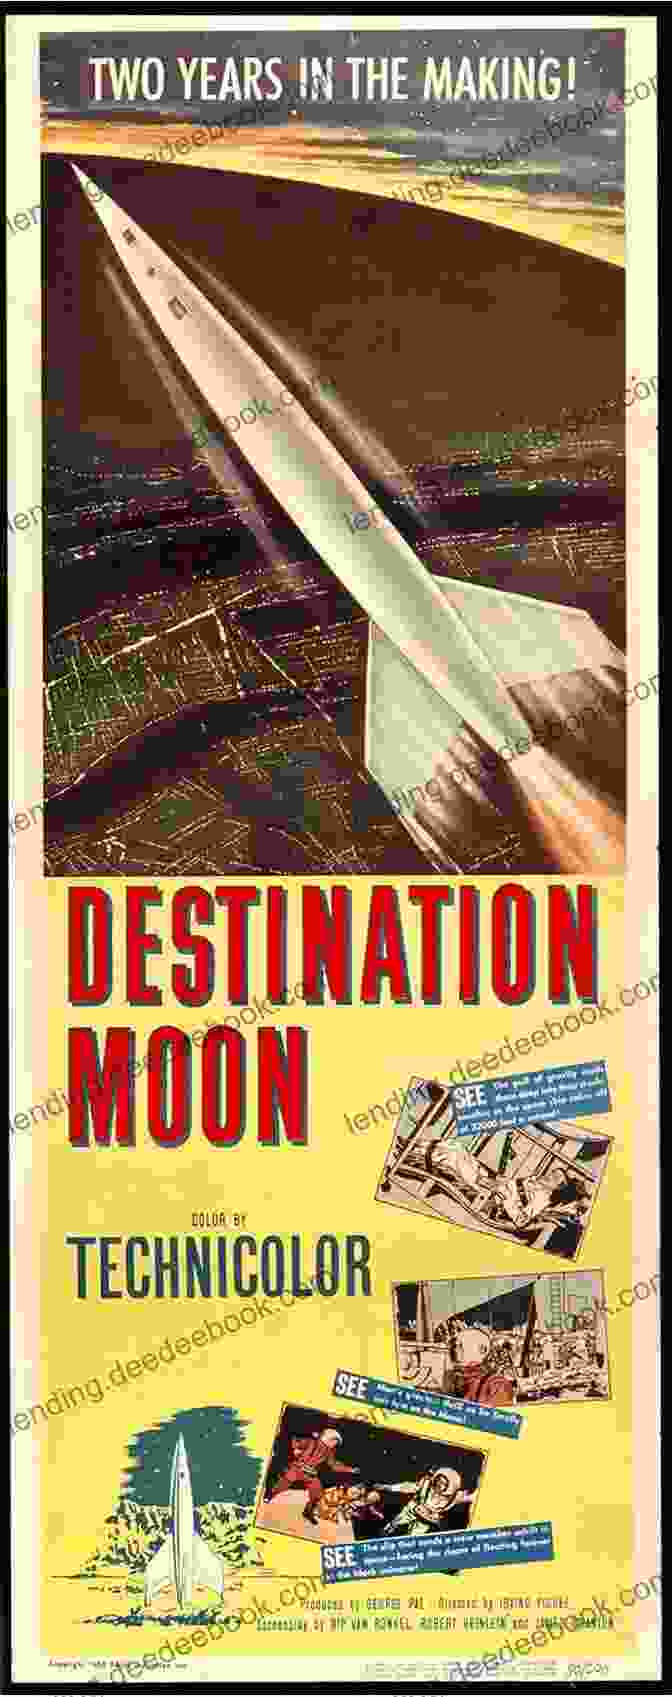 A Promotional Poster For The 1950 Film Destination Moon, Showing A Rocket Ship Blasting Off Into Space Vivid Tomorrows: On Science Fiction And Hollywood